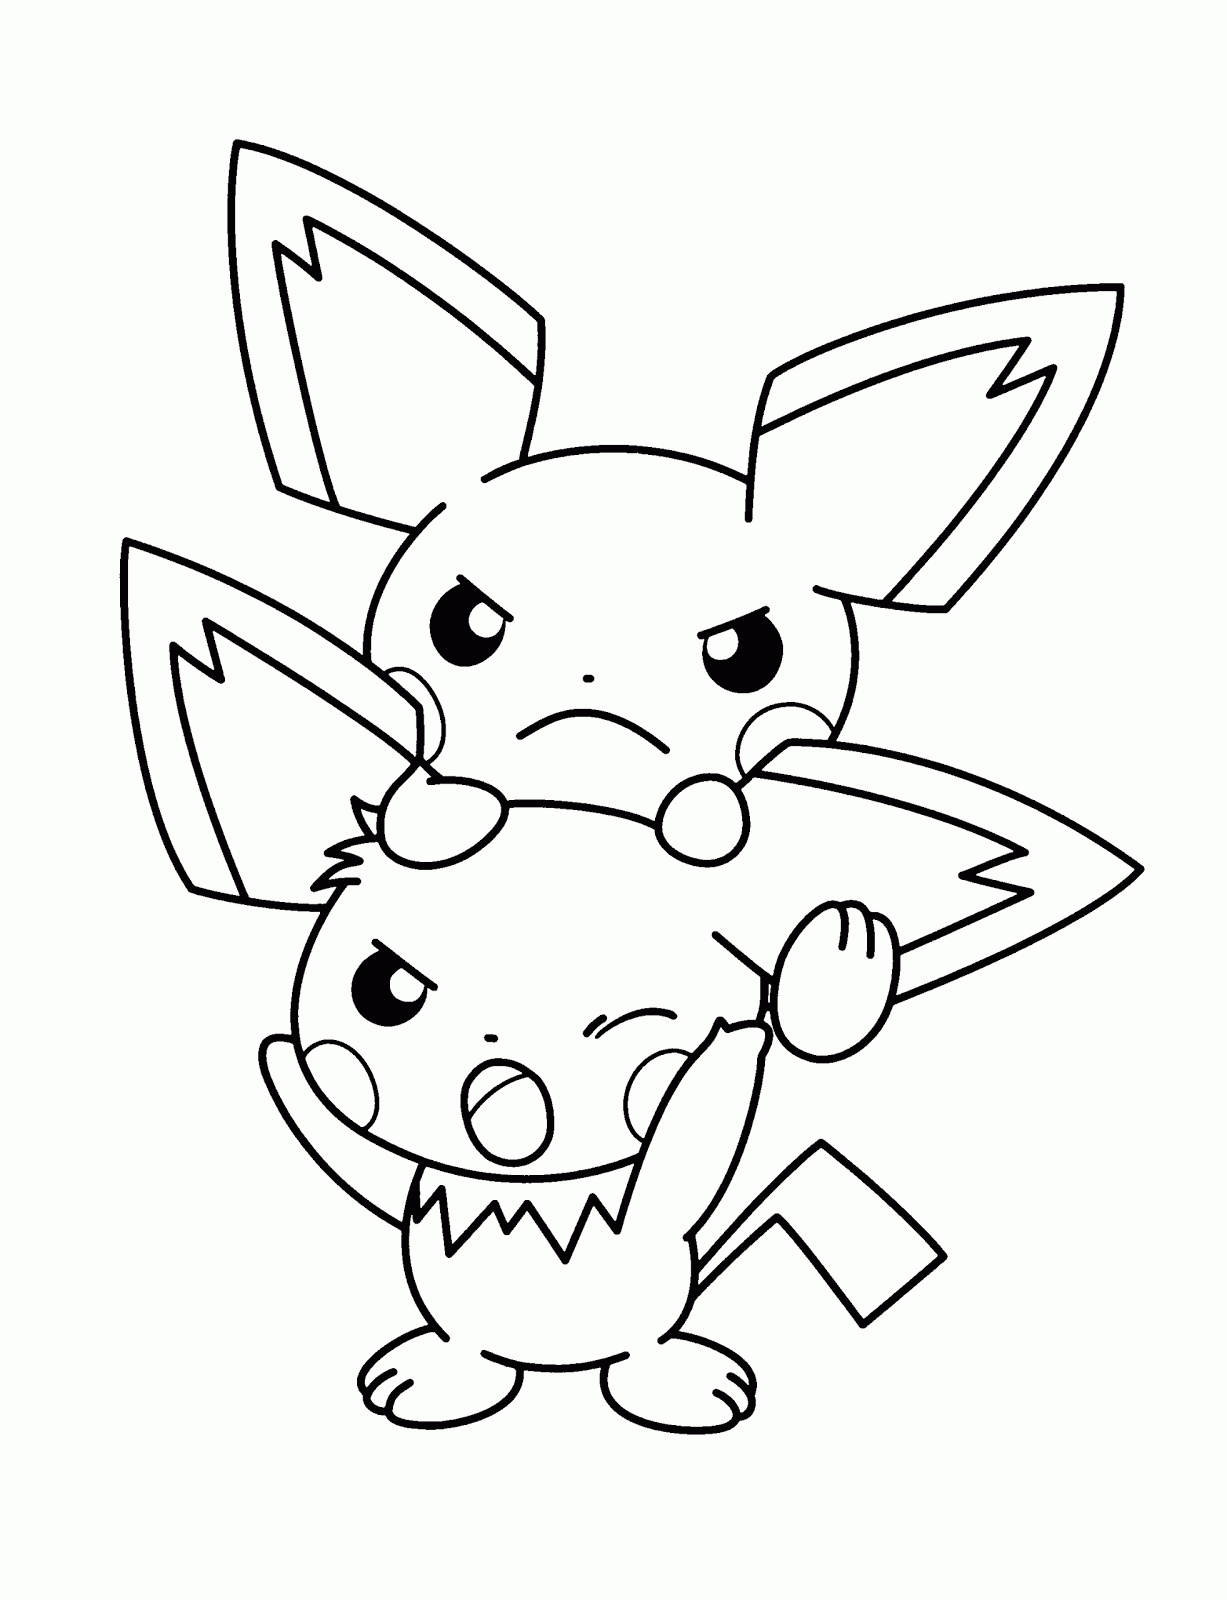 Pokemon coloring pages | Kids coloring pages | #28